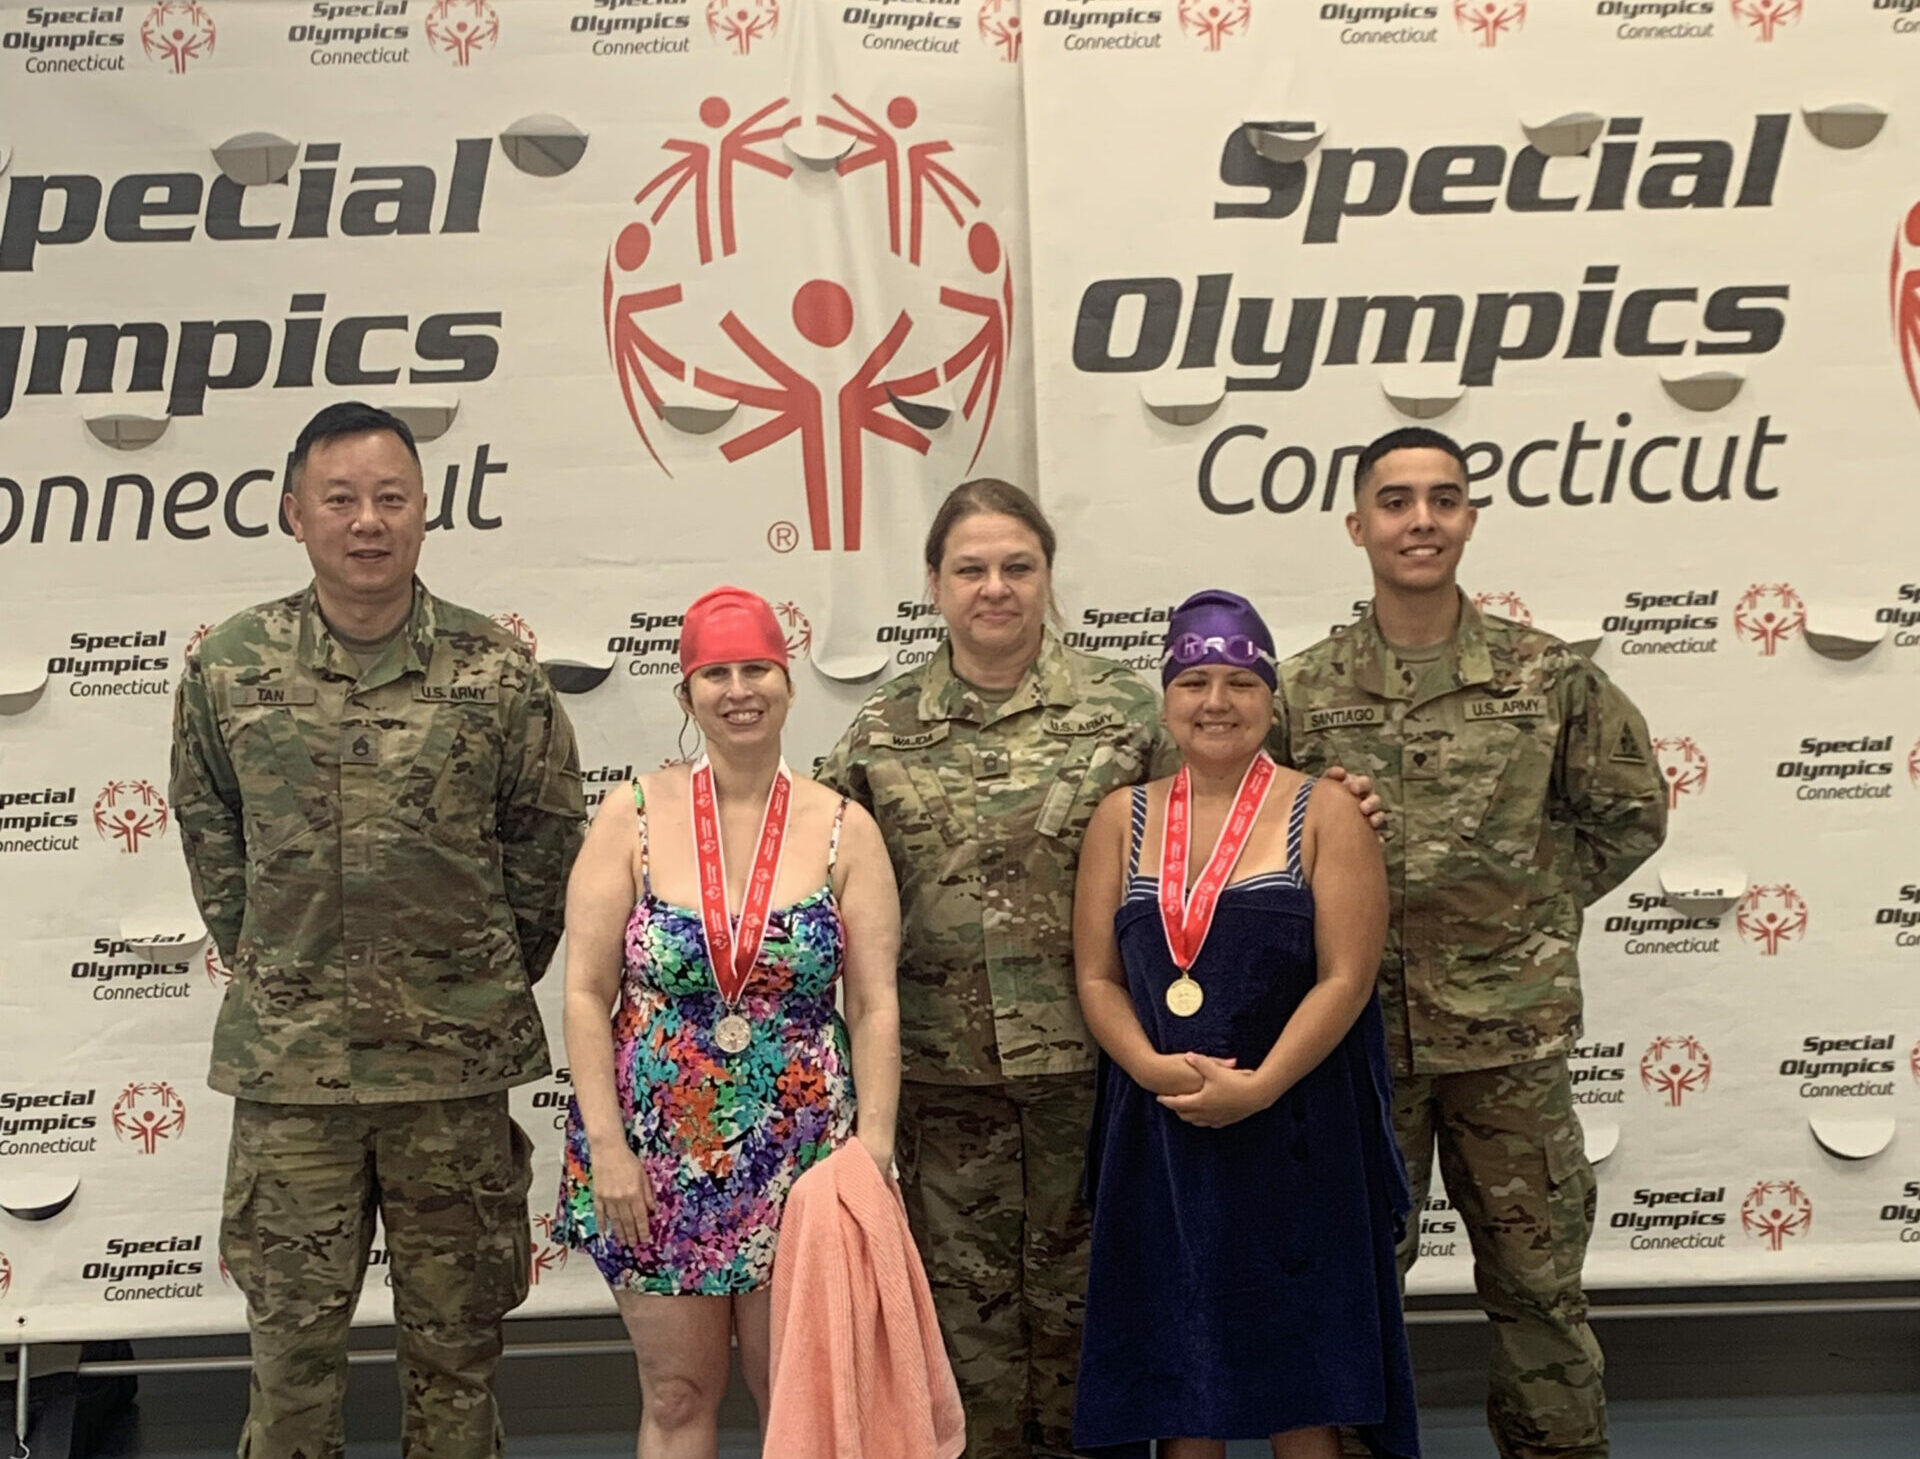 Maleigha on left at Special Olympics awards ceremony with 3 military soldiers with her